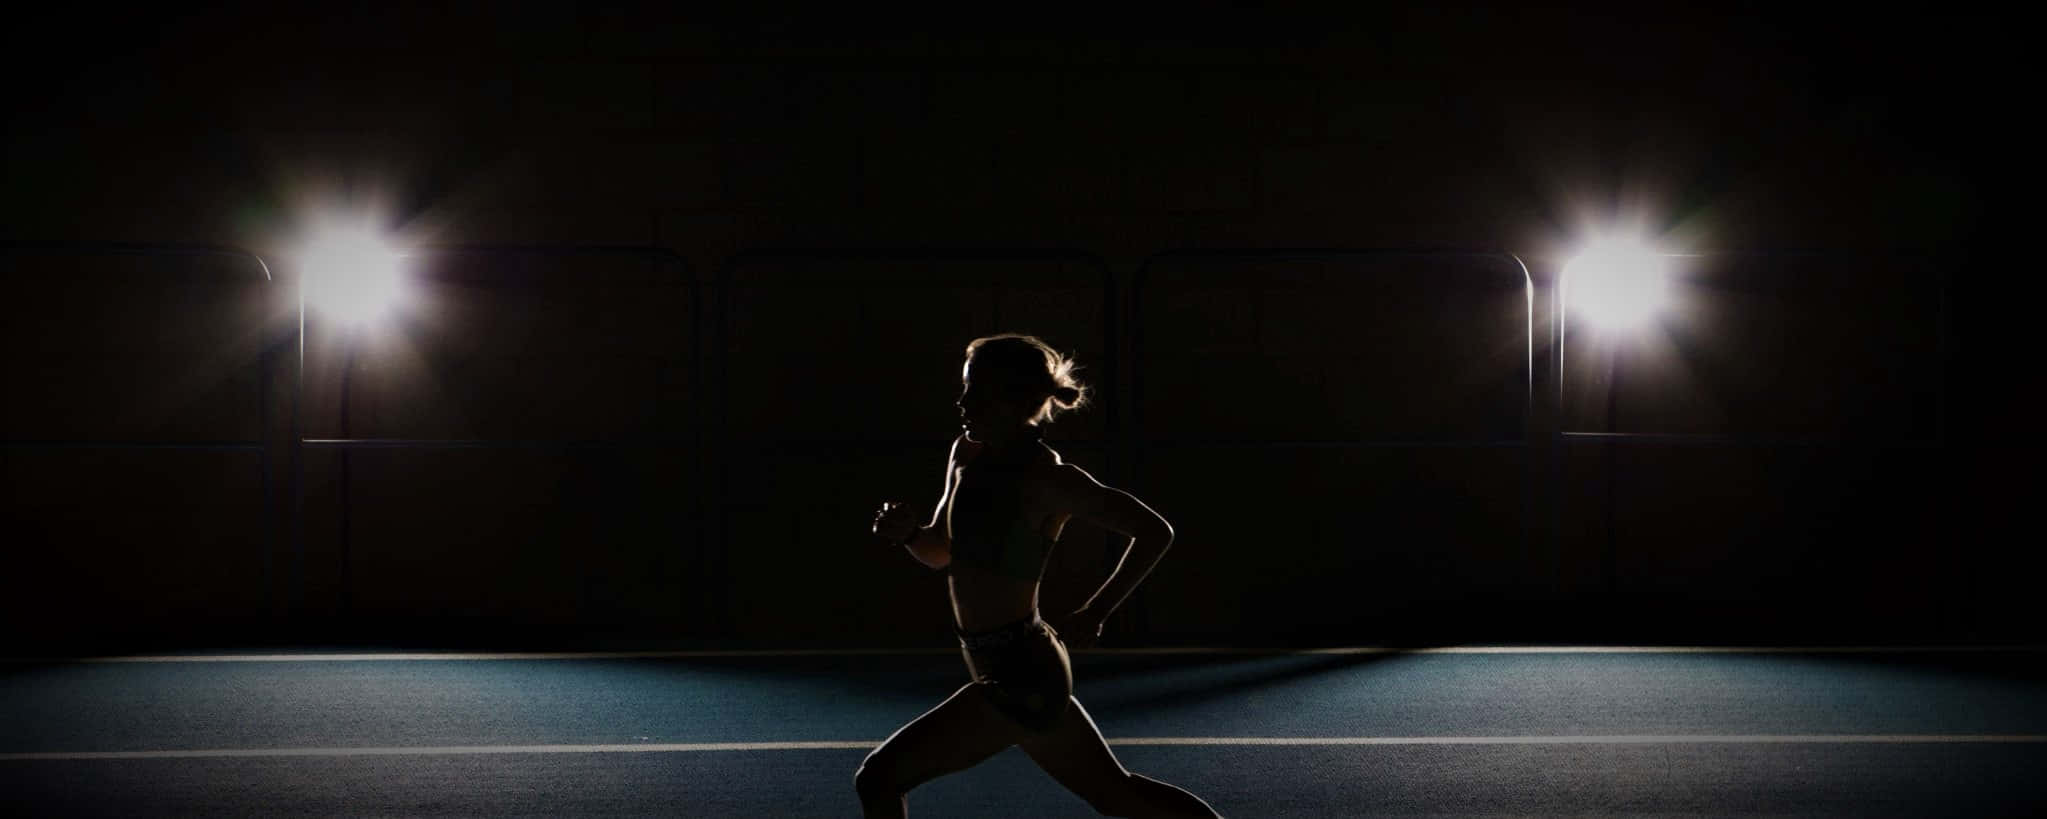 A Woman Running In The Dark On A Track Wallpaper